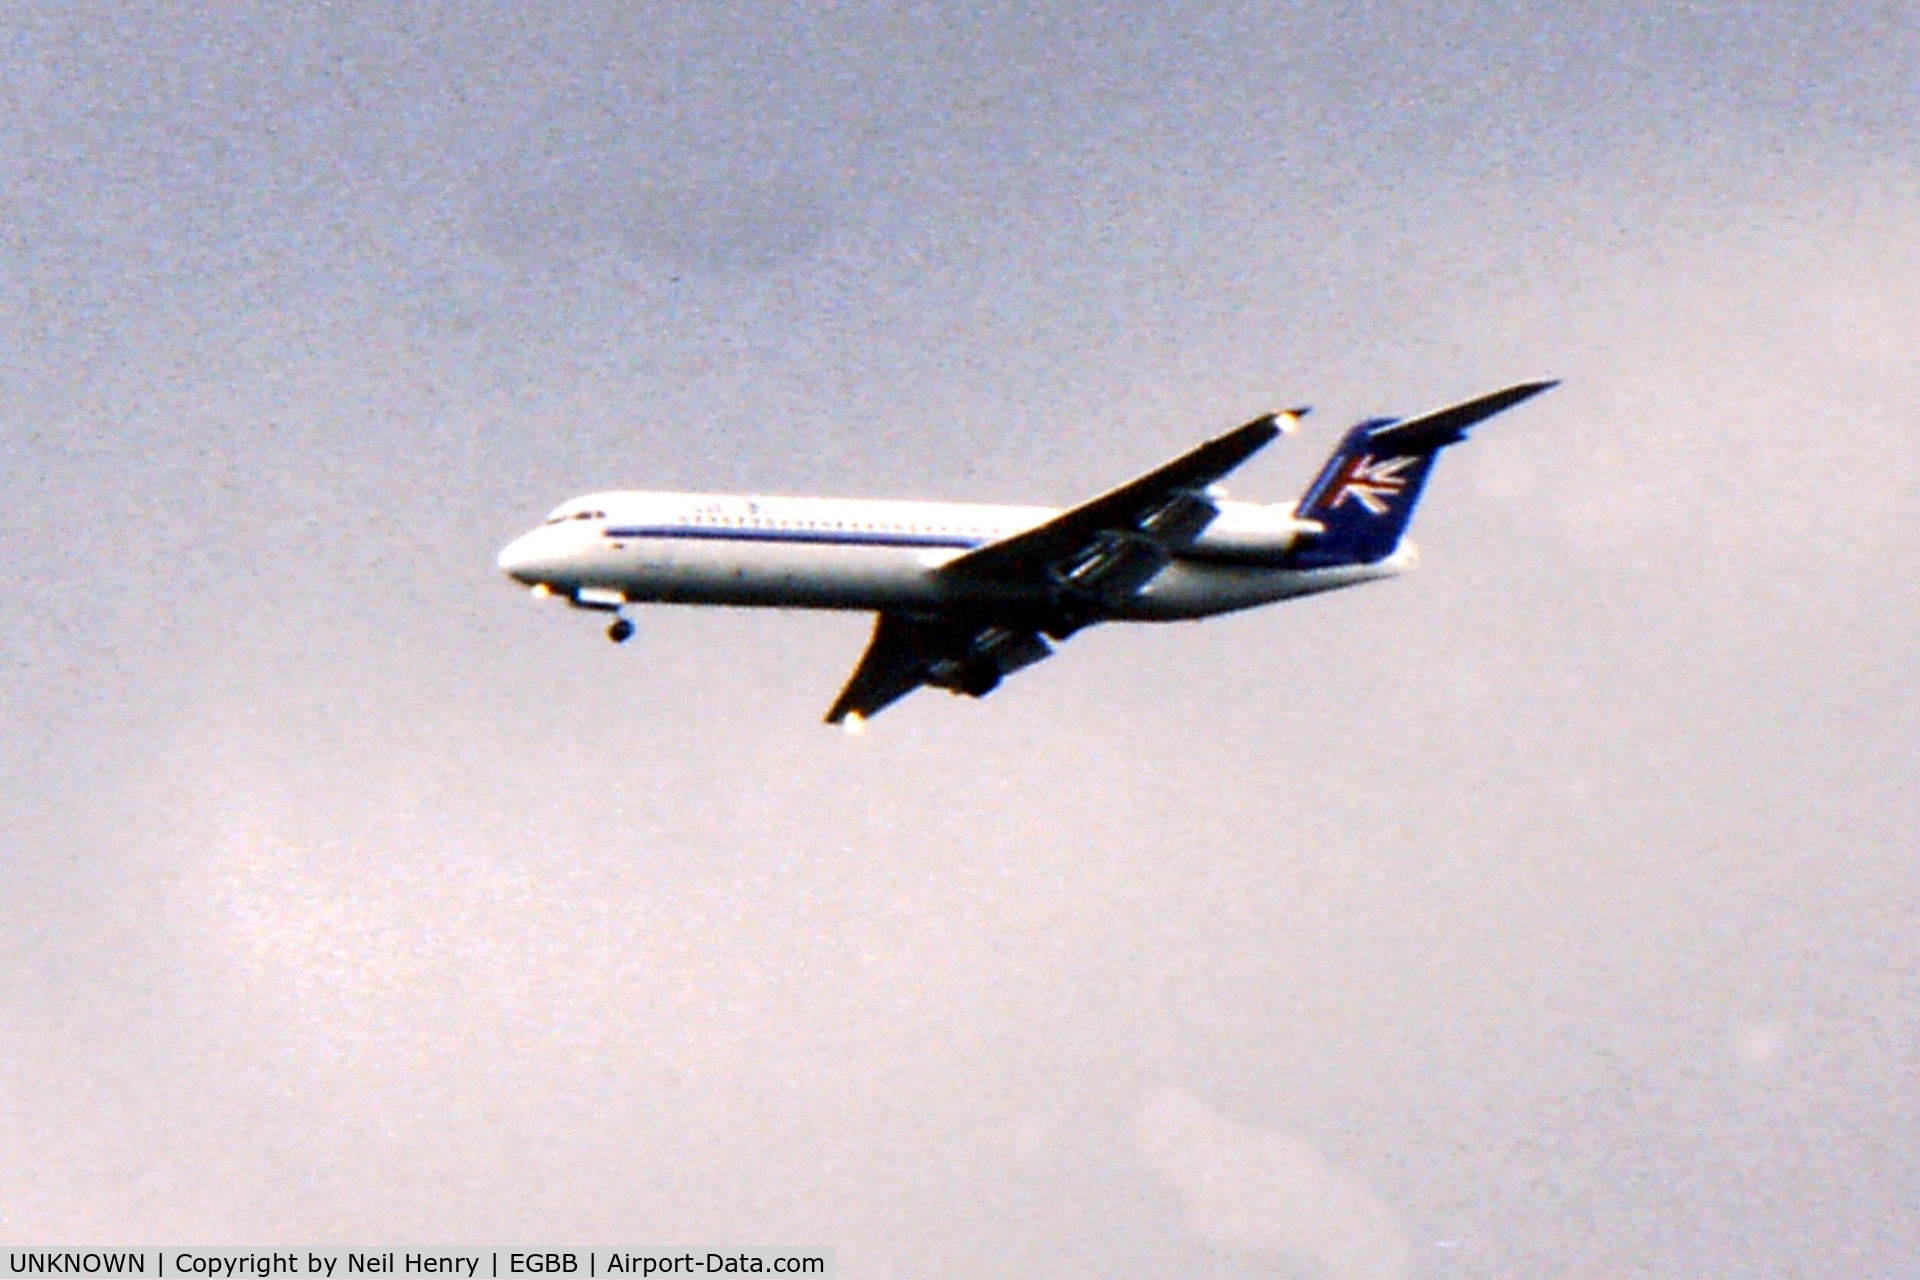 UNKNOWN, Airliners Various C/N Unknown, Unidentified Air UK flight arriving in 1996 - scanned from original slide